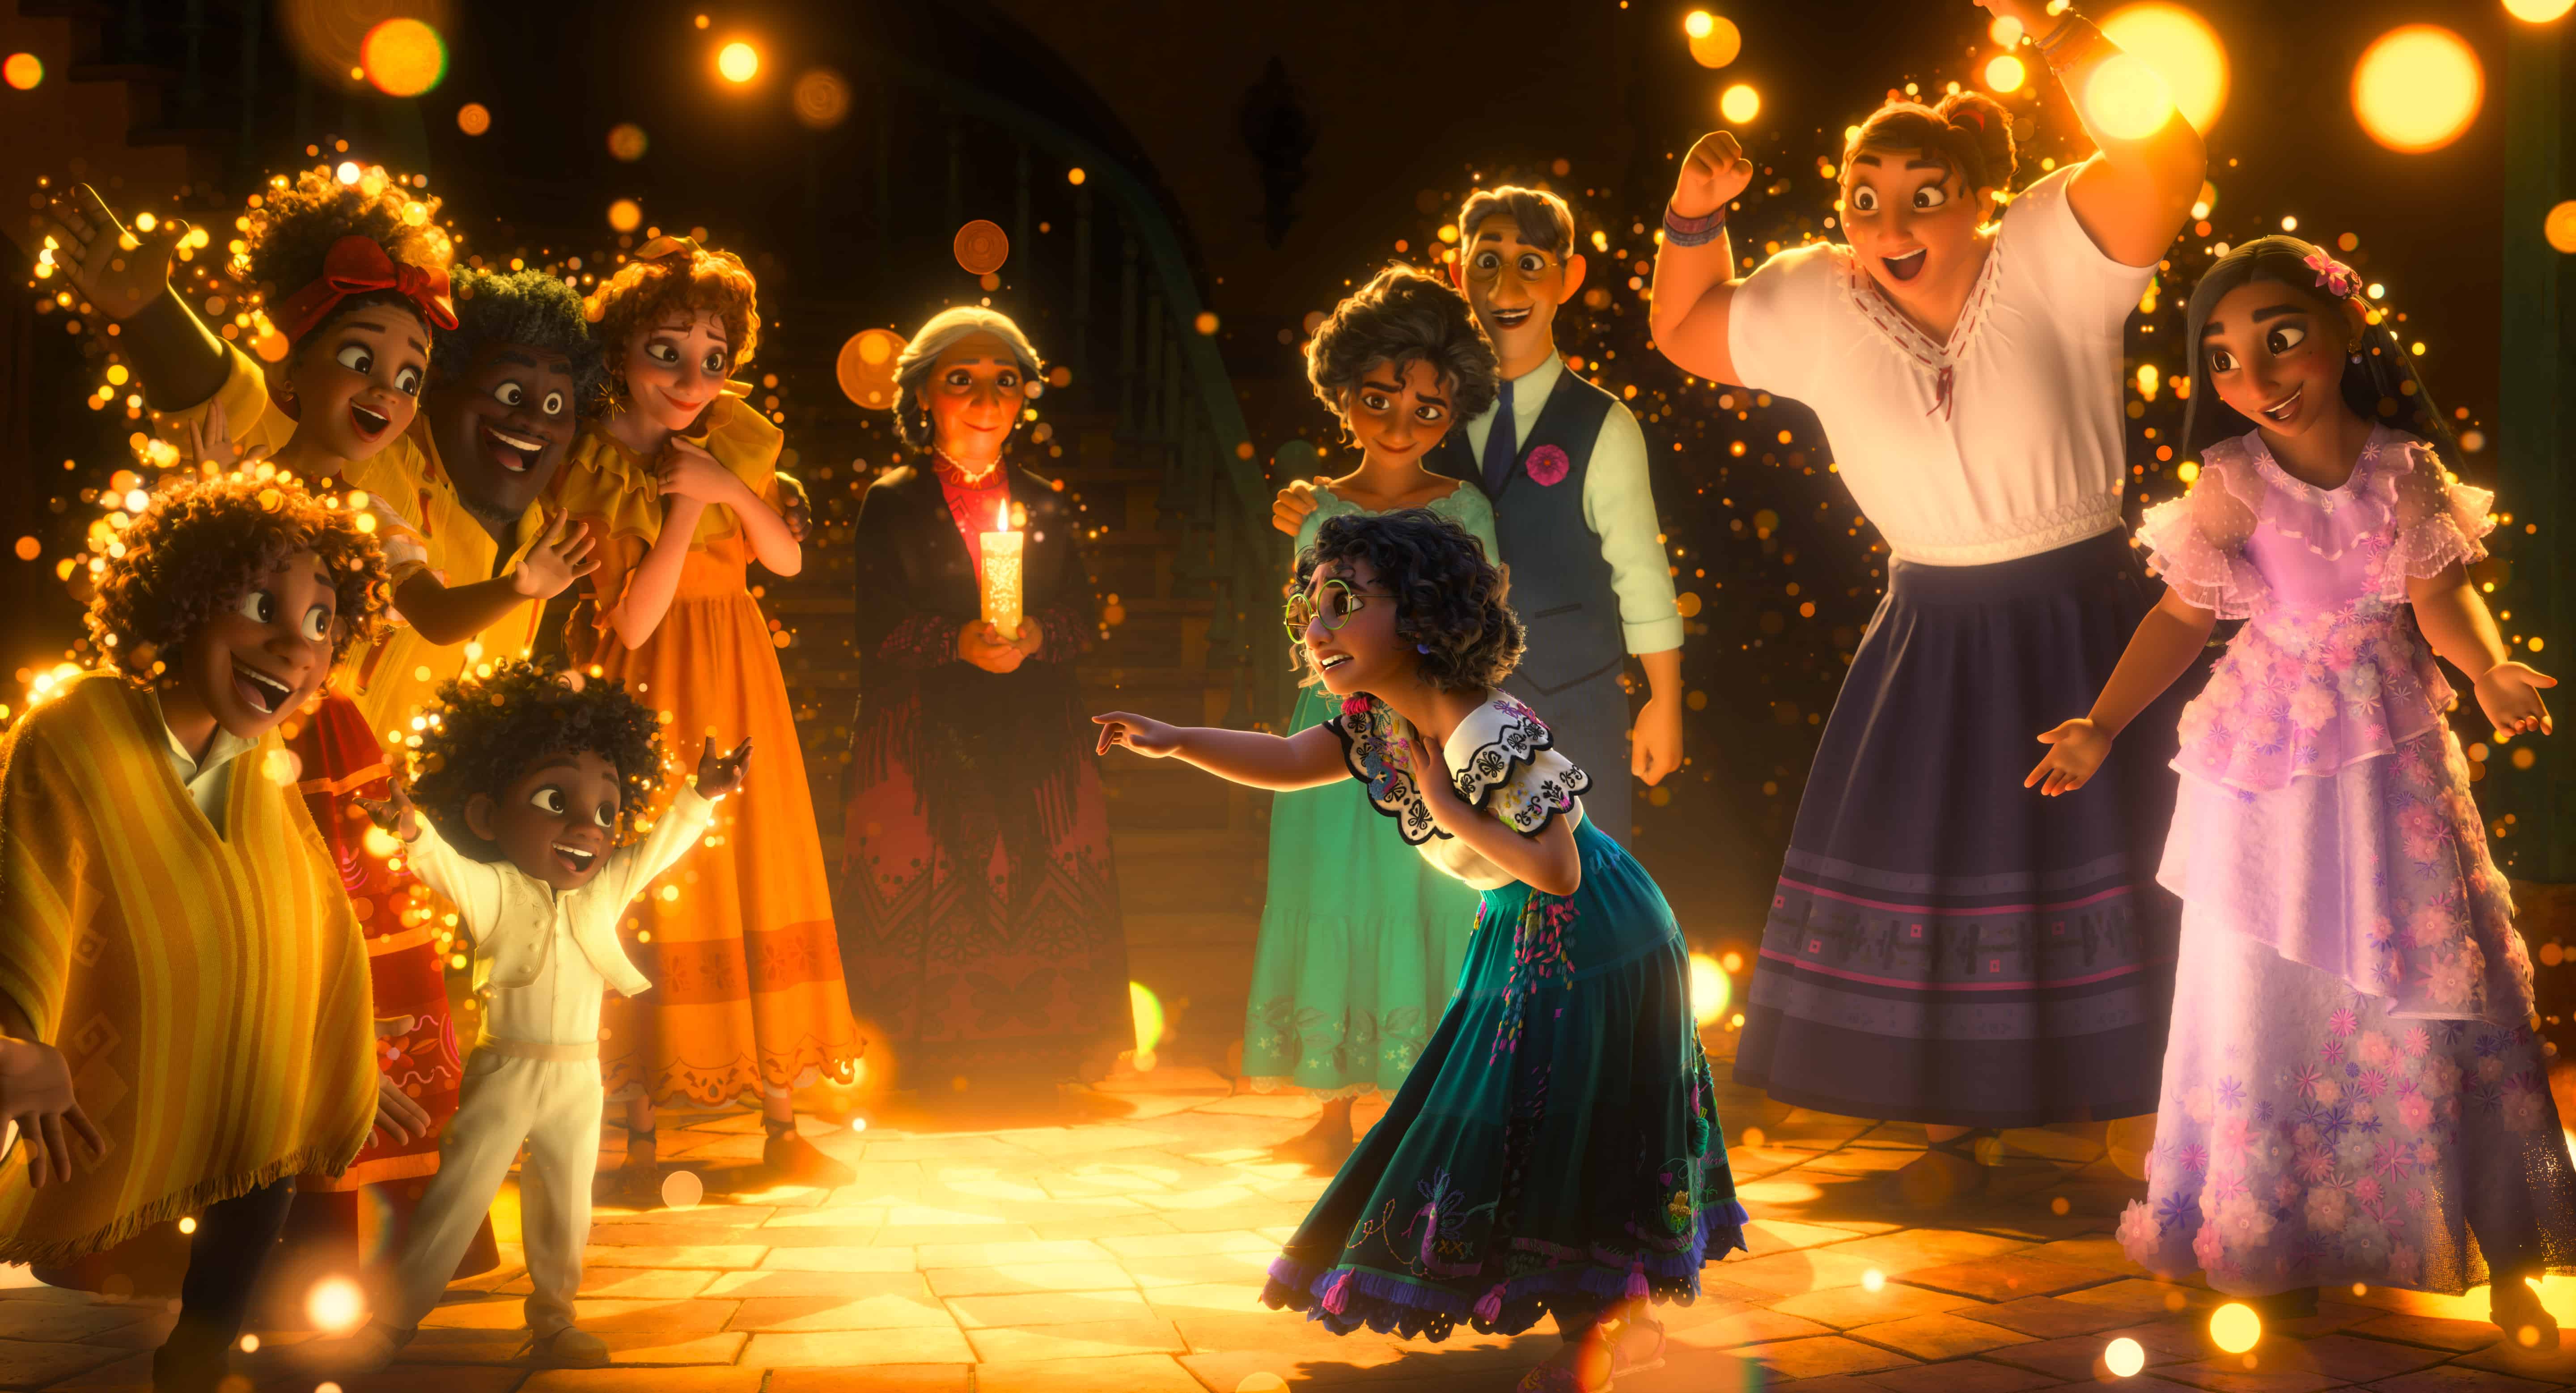 In Disney's Encanto, the Madrigal family members are seen wearing their vibrant, colorful outfits. In the center of the image, a young girl dances with her arms outstretched. - Encanto